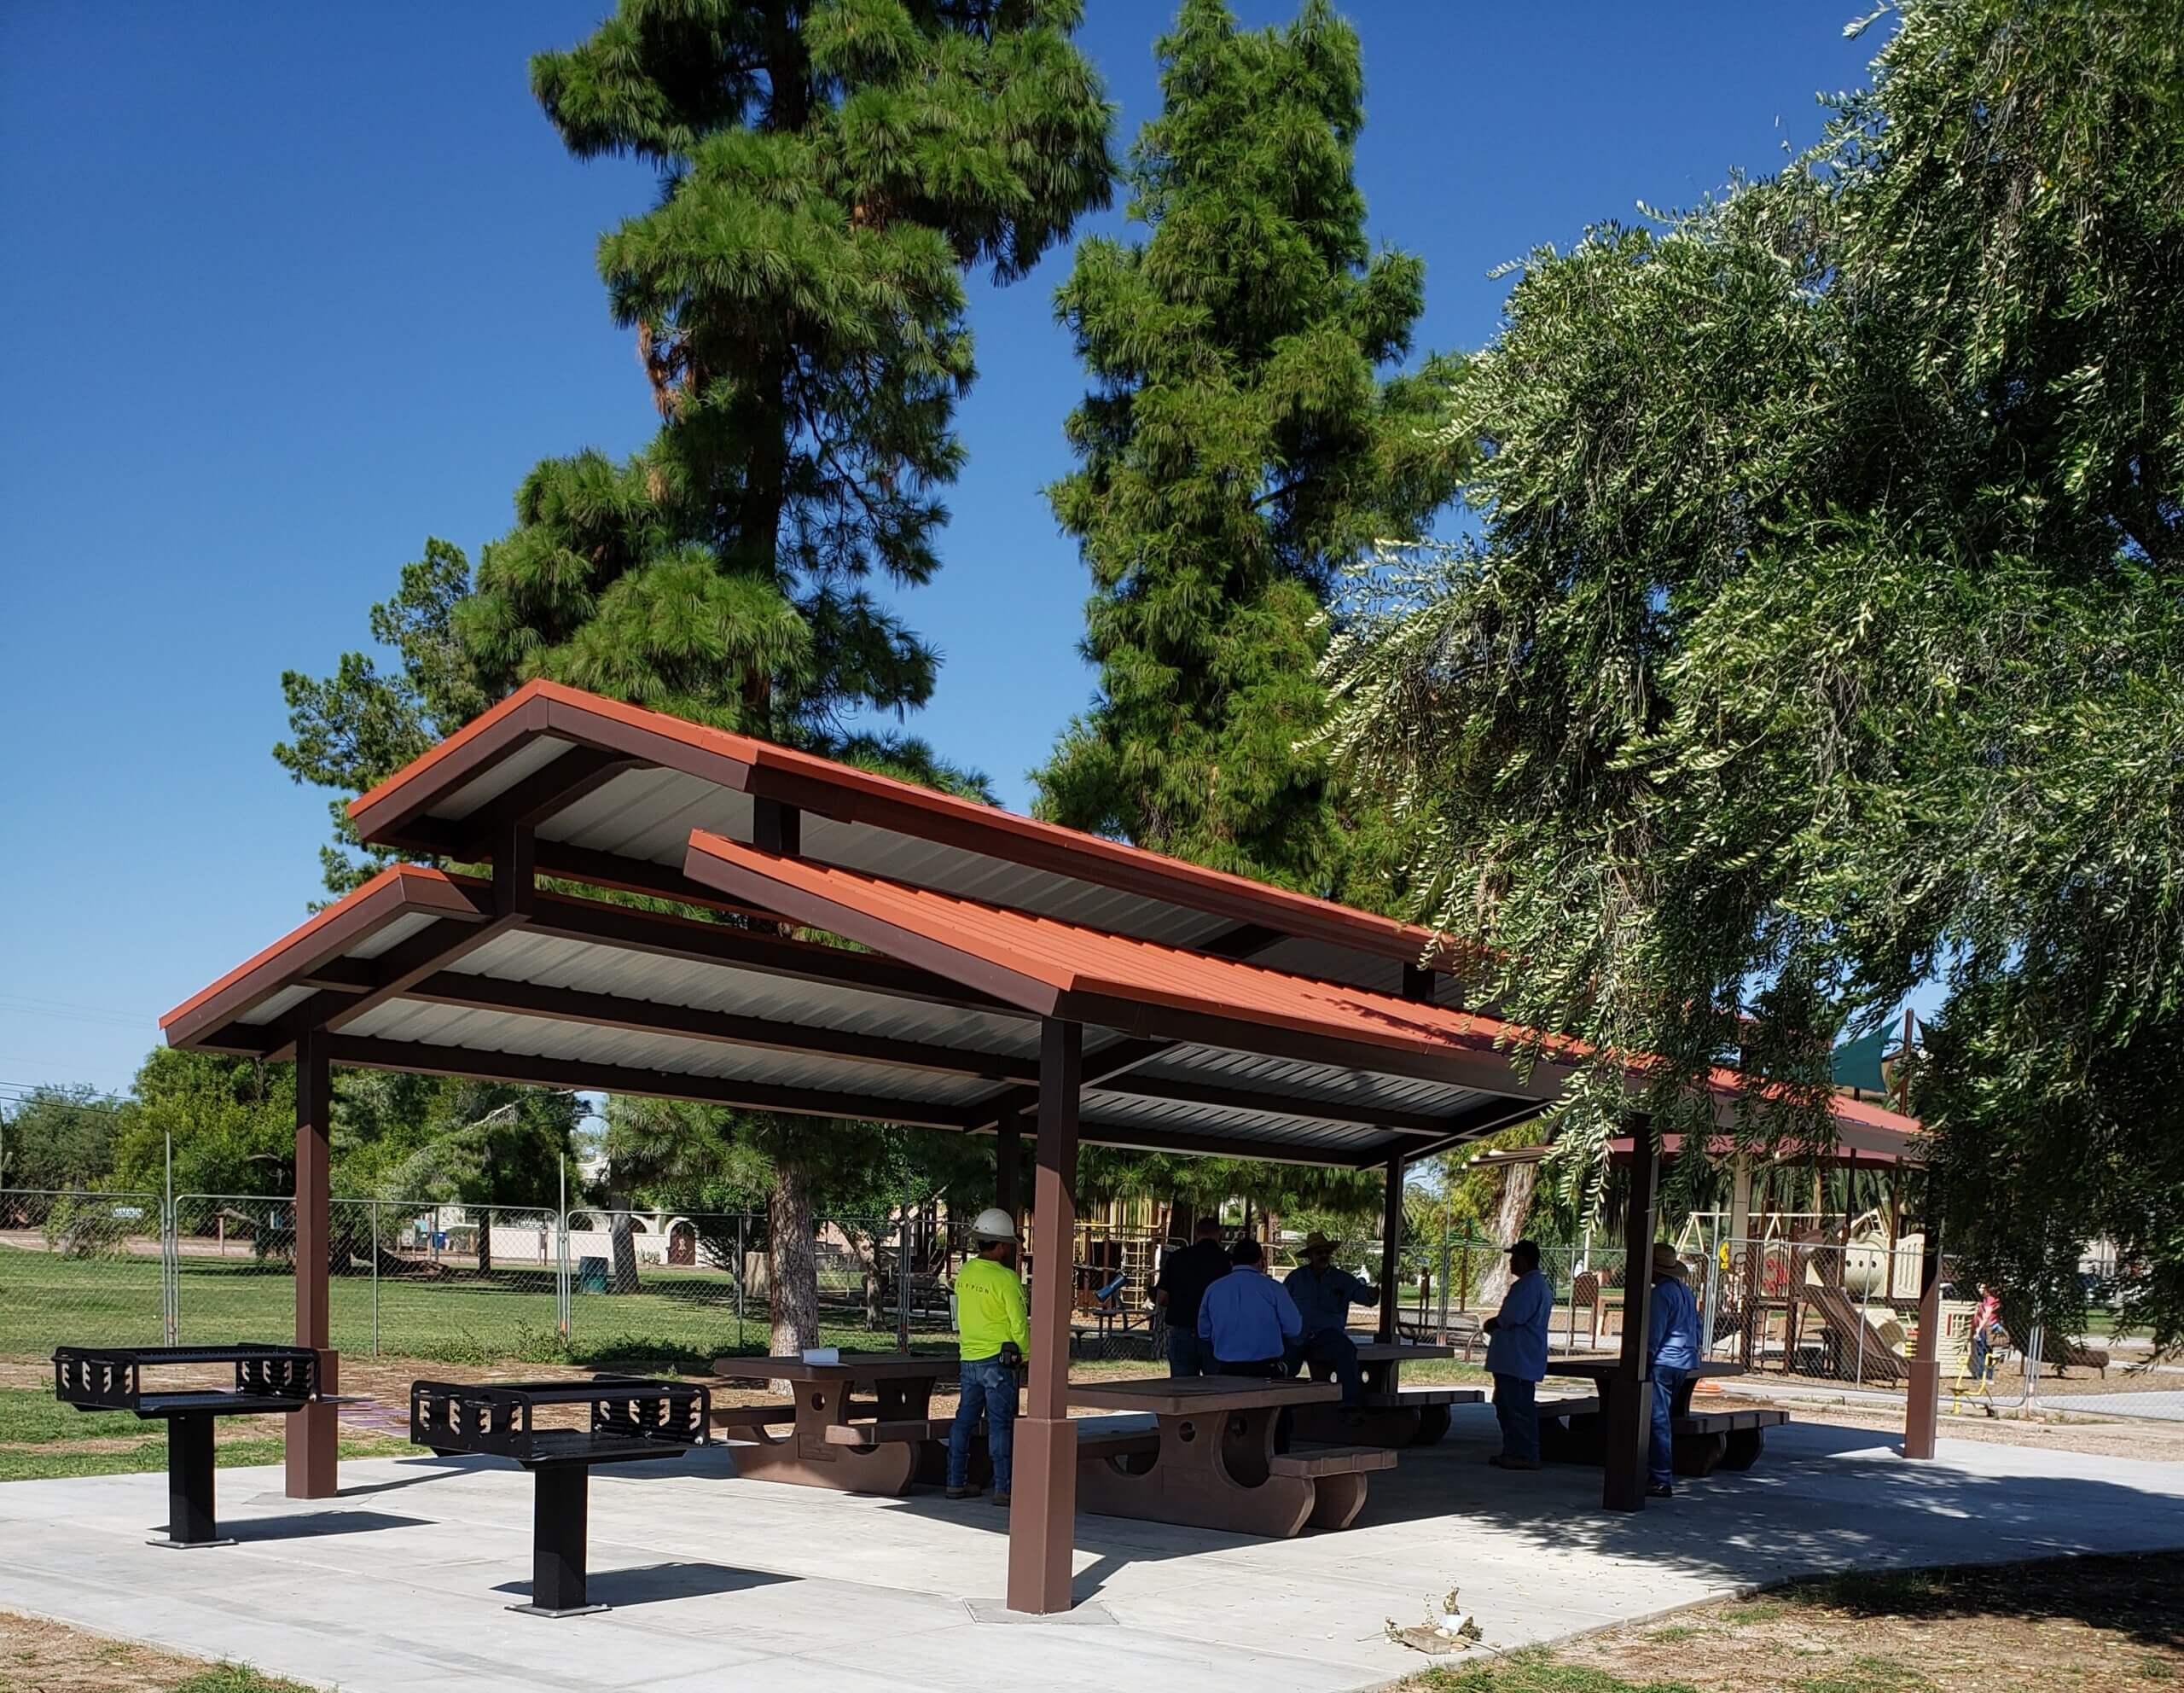 A park pavilion built by a design and engineering company